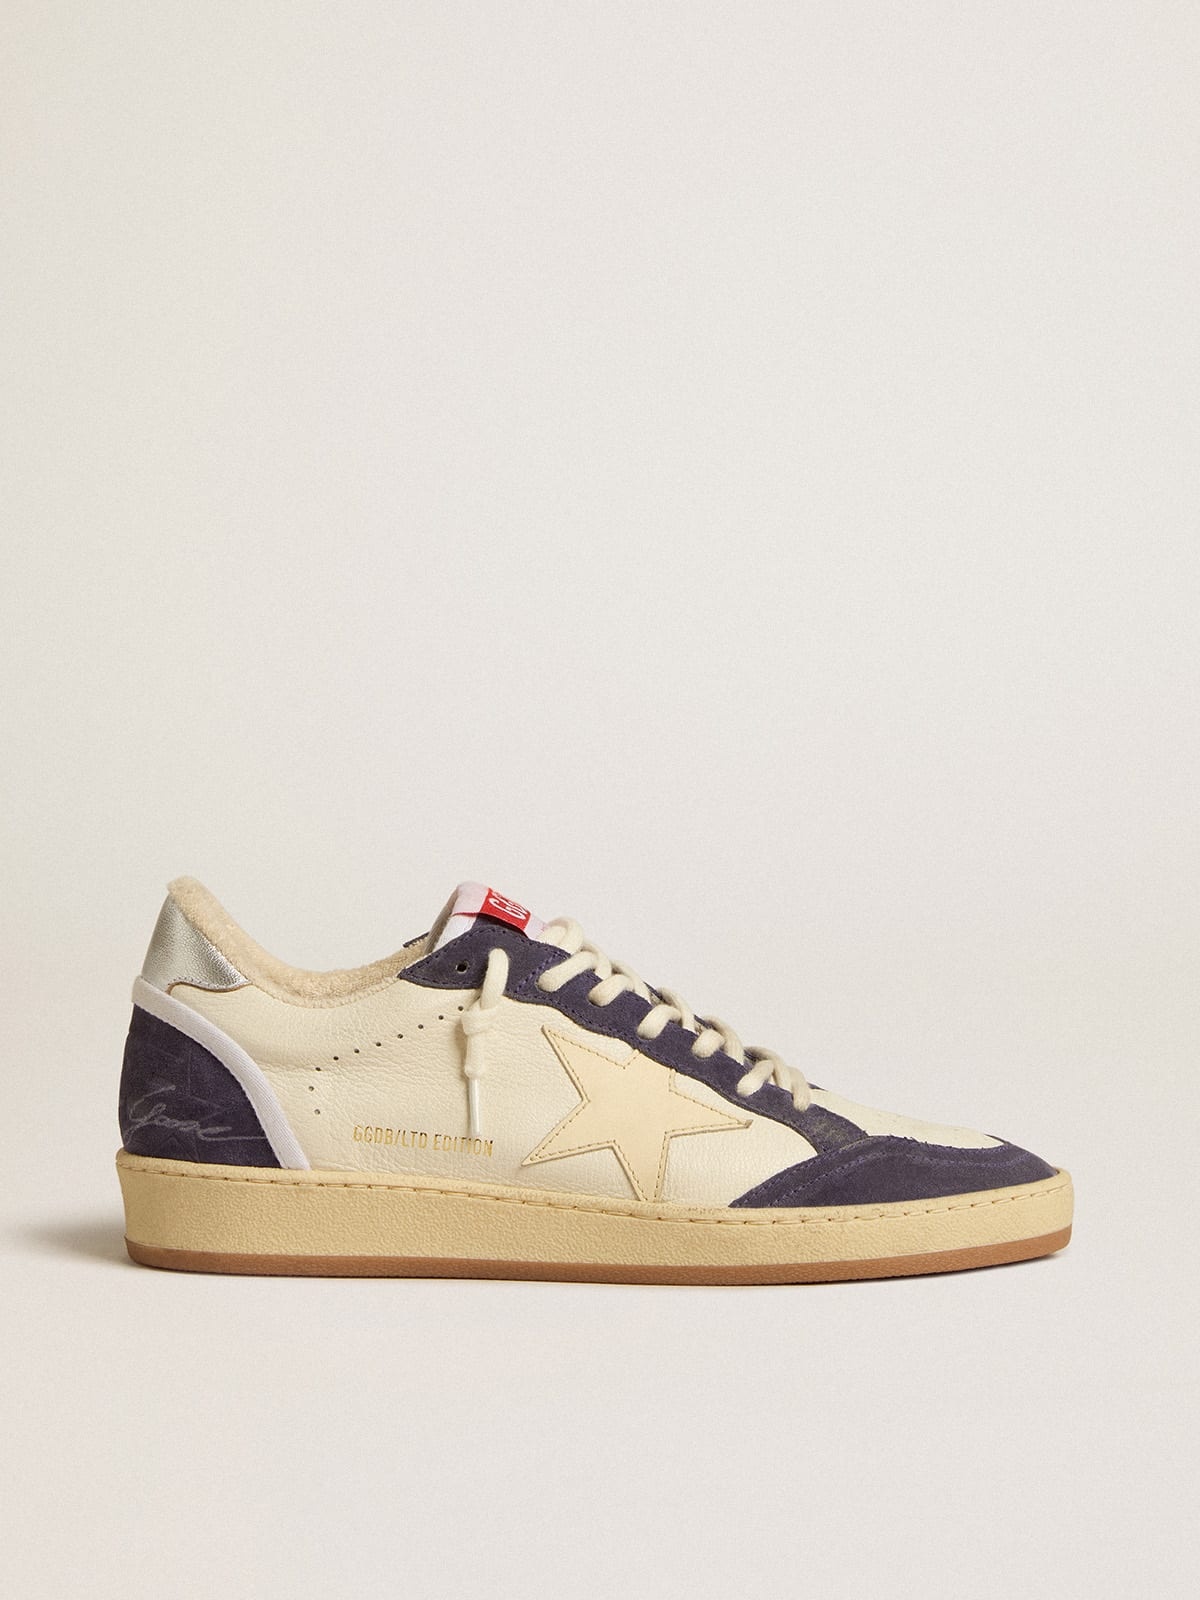 Ball Star LTD in nappa leather and suede with cream star and silver heel tab - 1